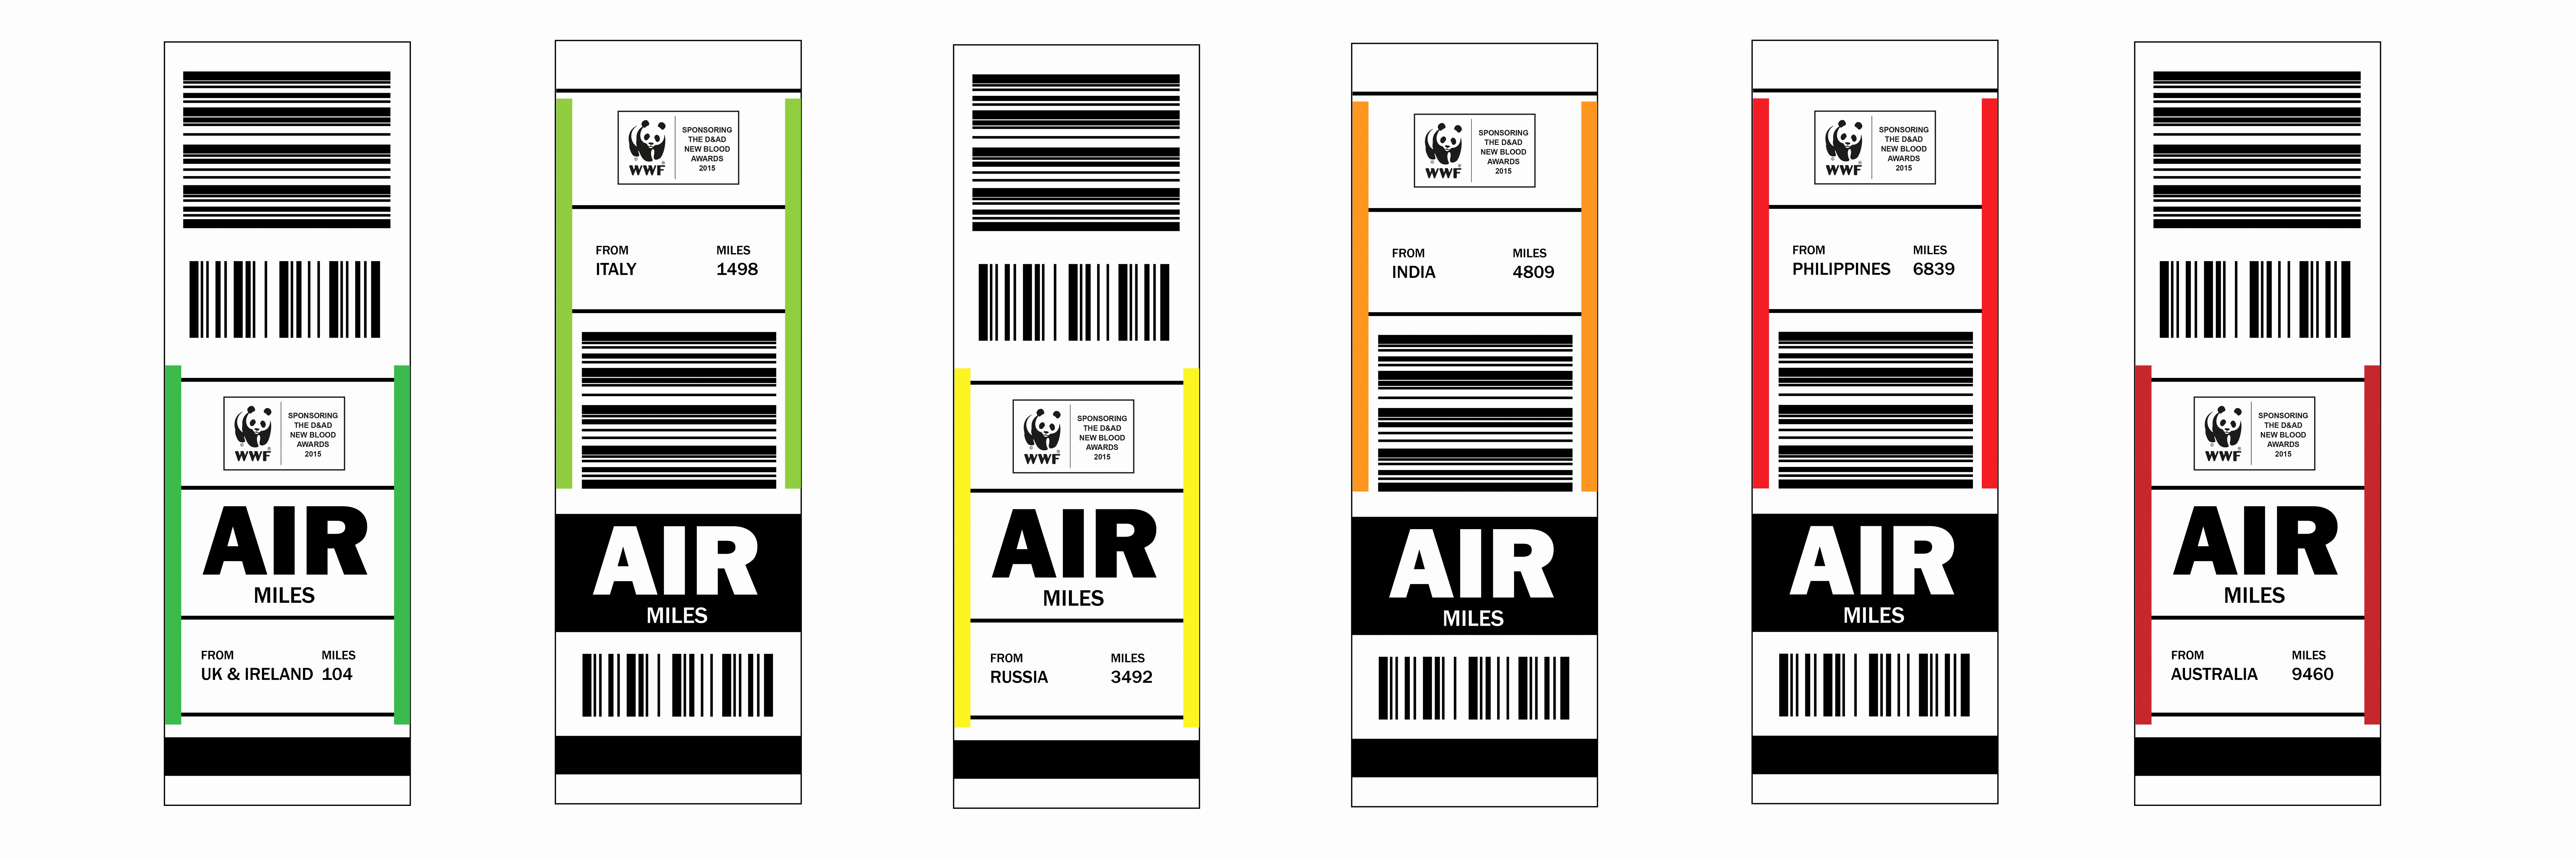 Luggage Tag Template Word Awesome Wwf Air Miles – Simon andrew Designs